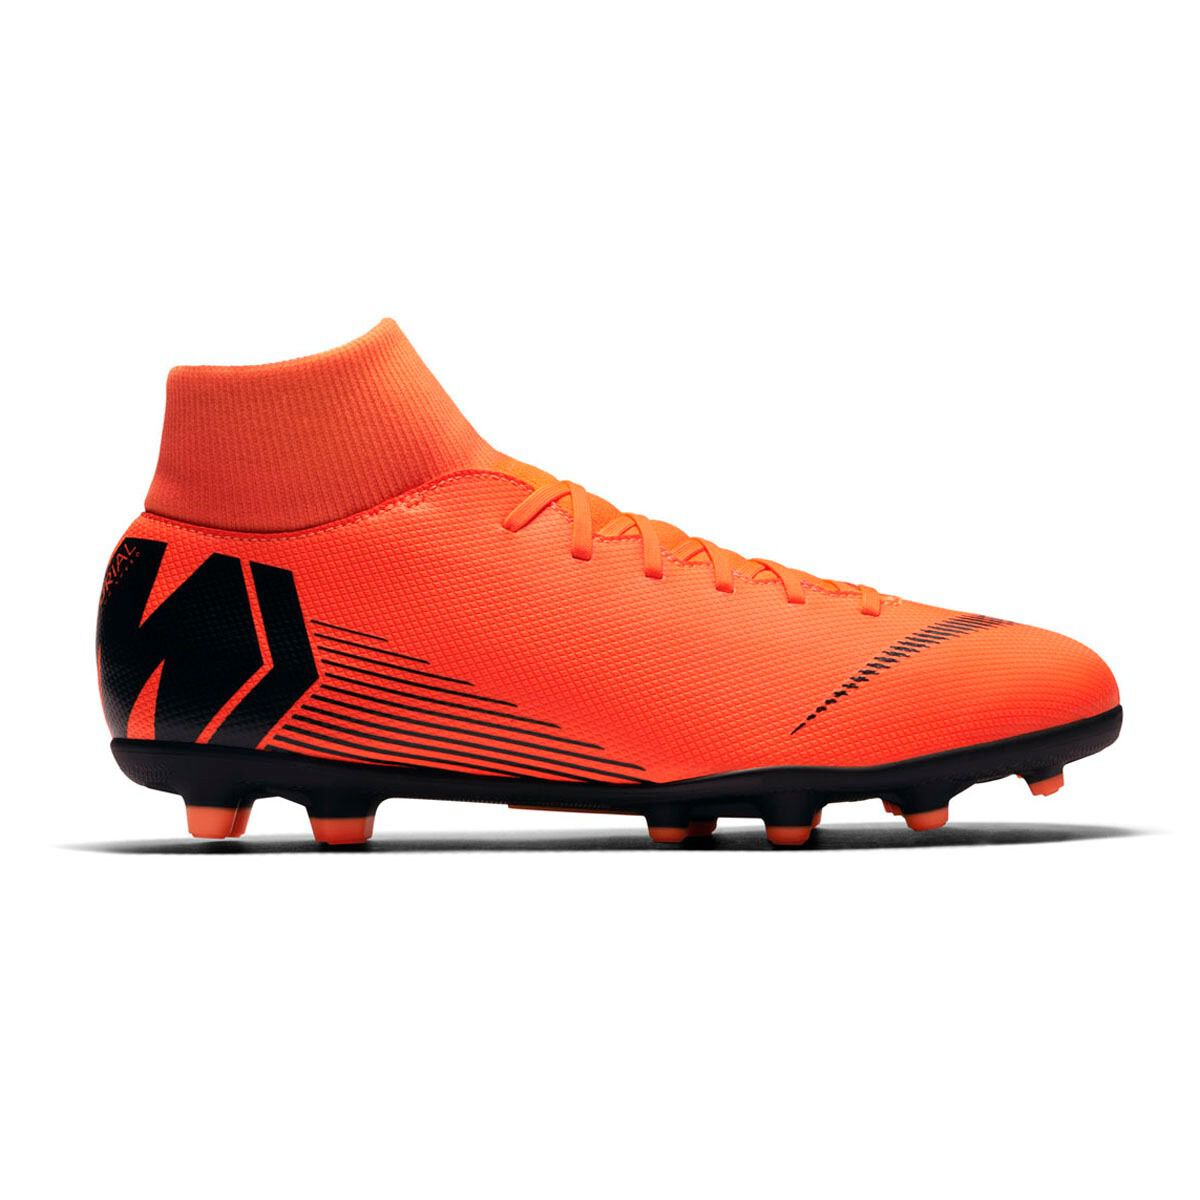 Buy Nike Mercurial Superfly VII Club TF Soccer Cleats Red.